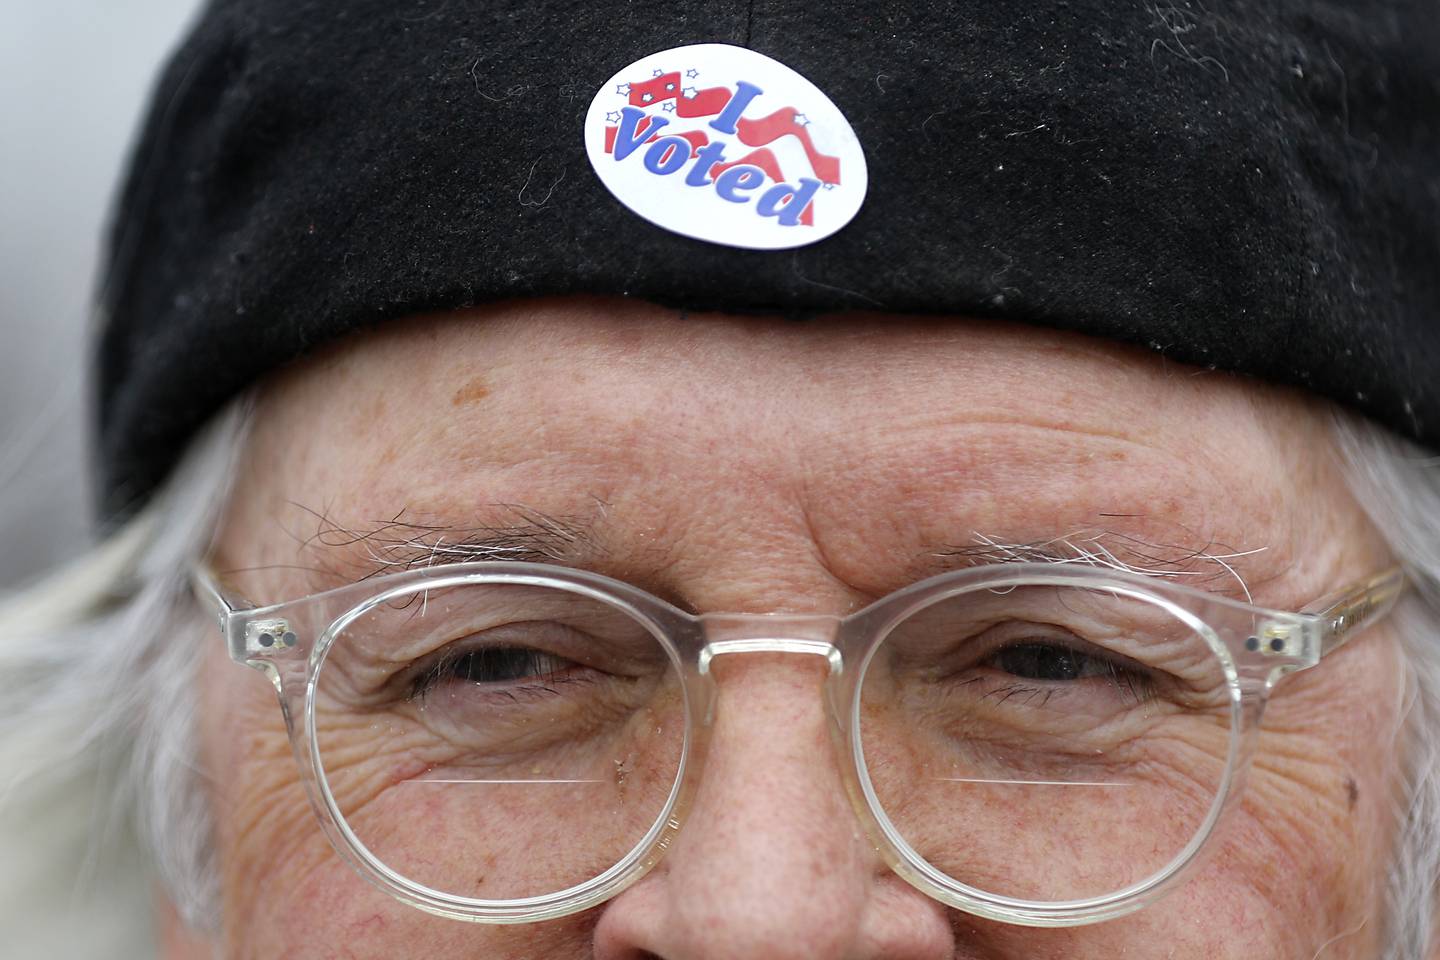 Dave Trost of McHenry wears a “! Voted” sticker on his hat Friday, March 31, 2023, after voting in the 2023 Consolidated Election at he McHenry City Hall. Election Day is April 4.